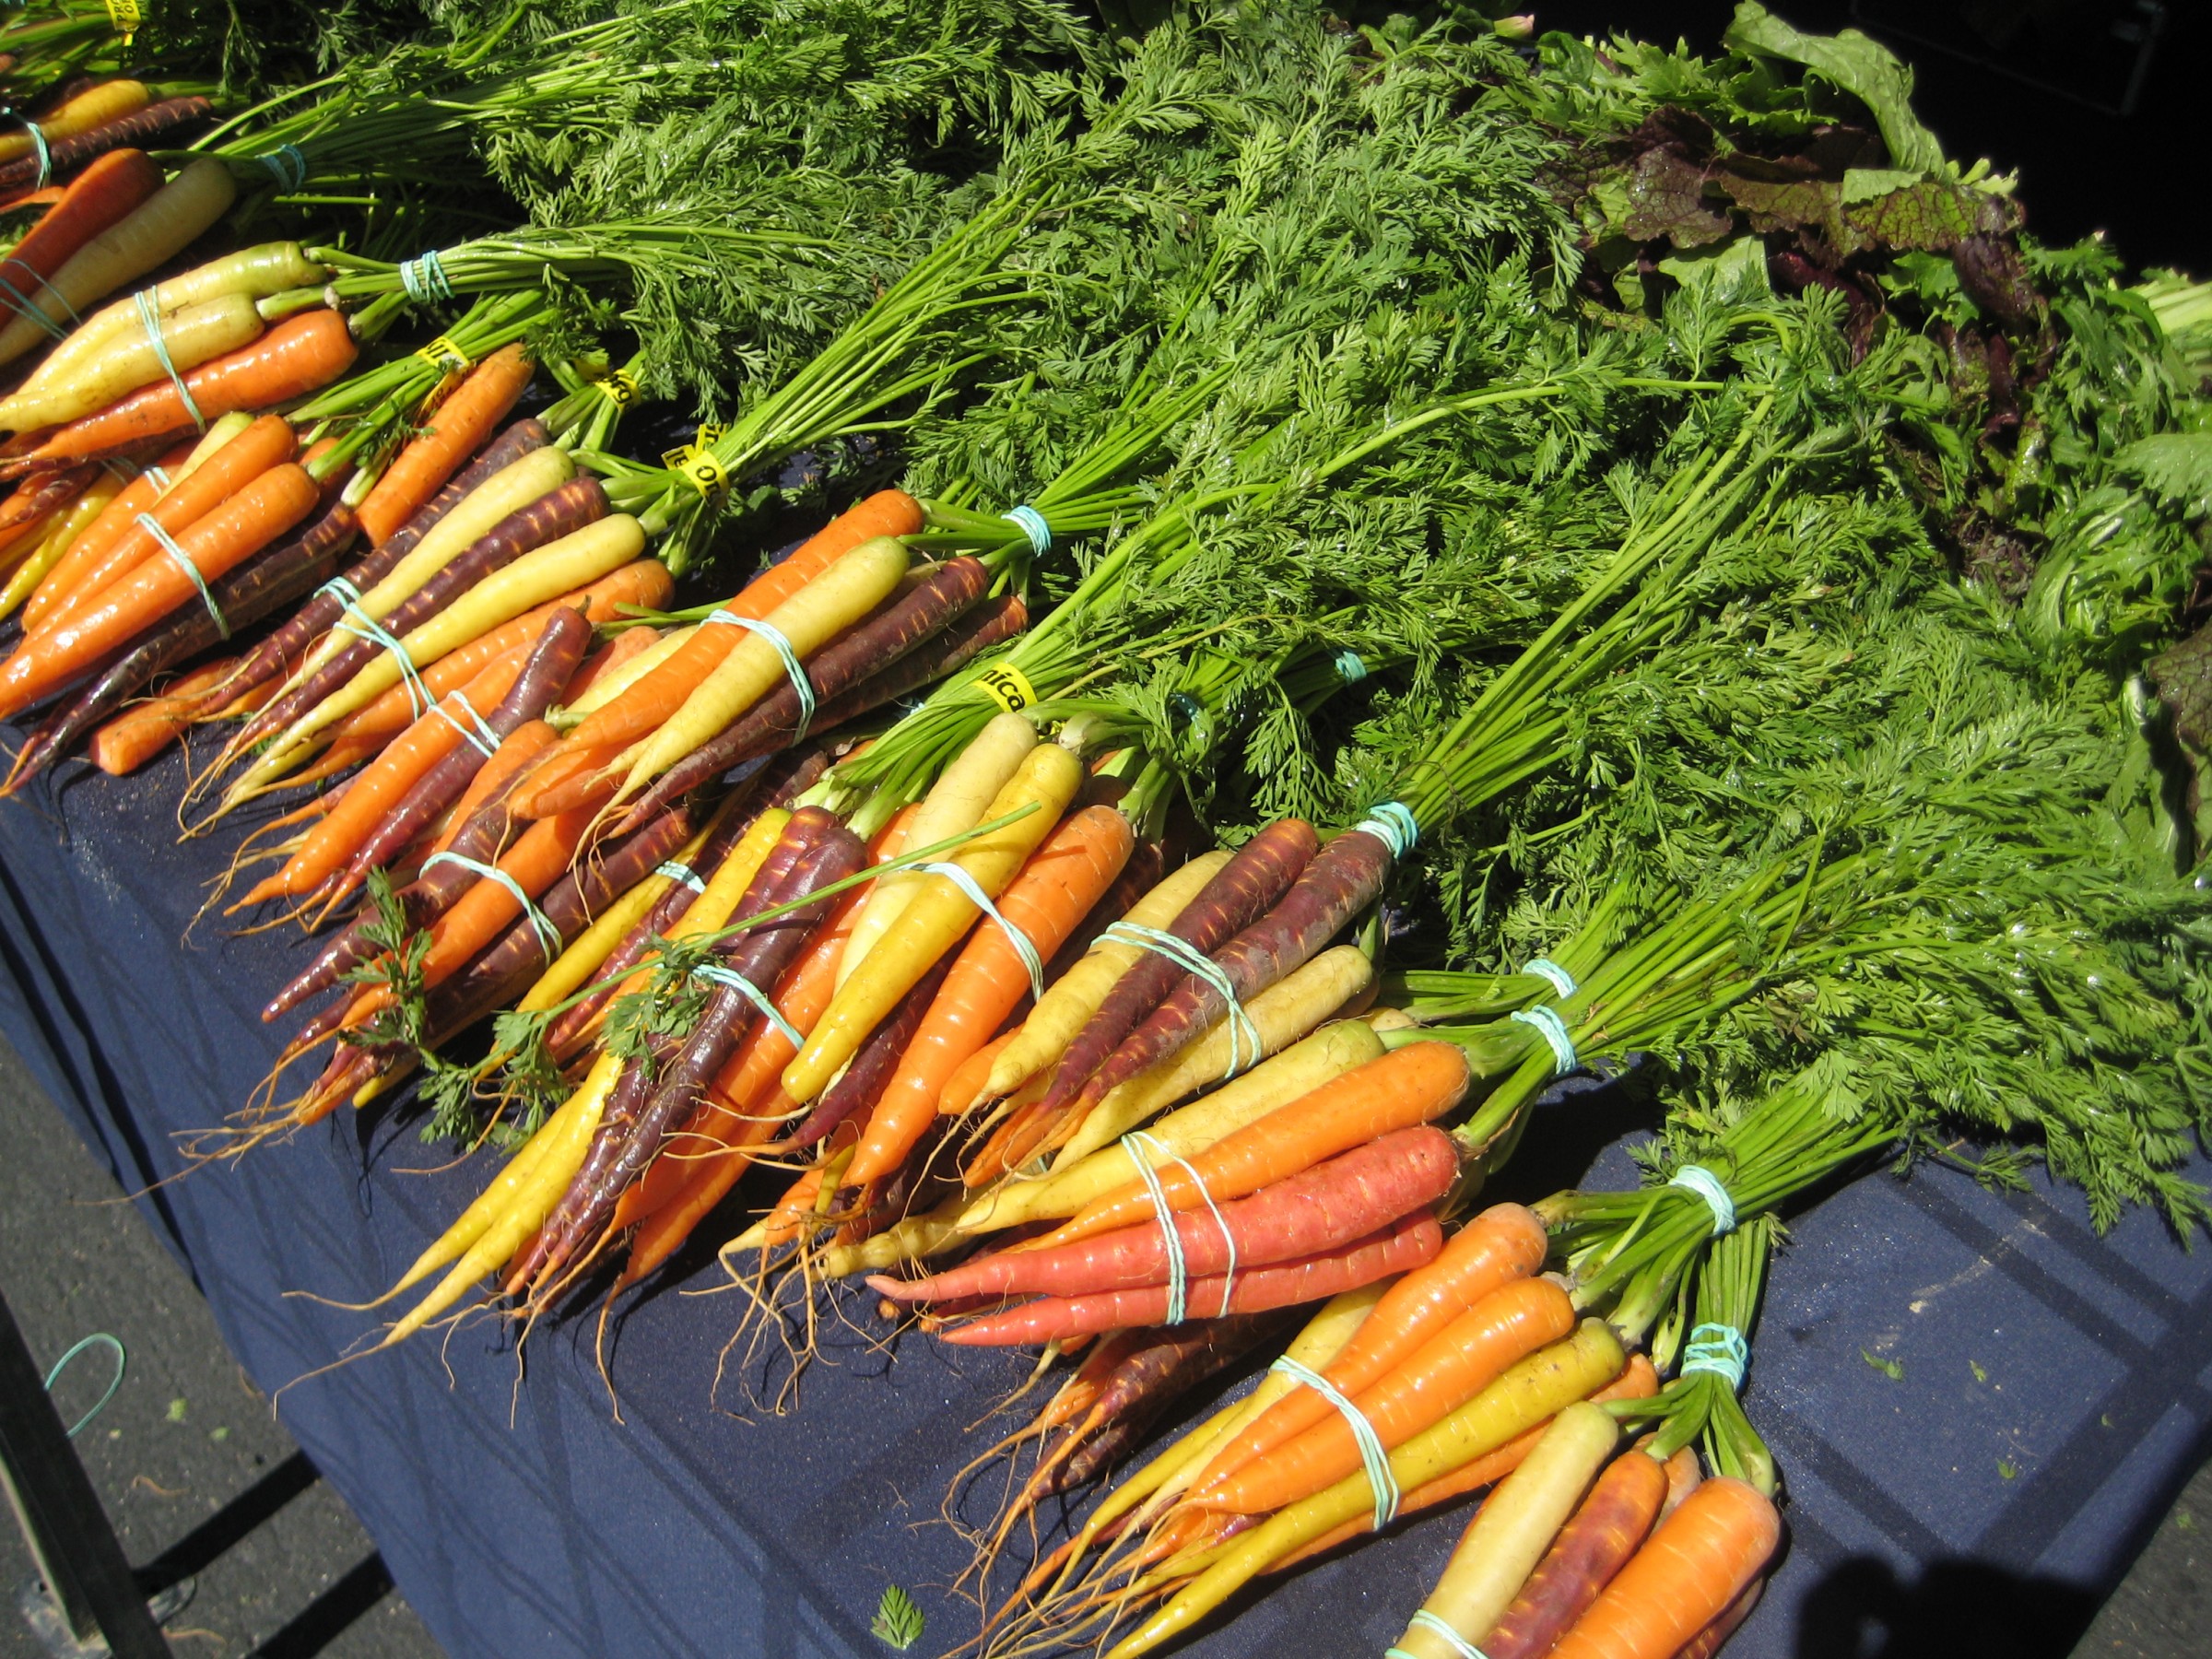 carrots for sale at a farmers market